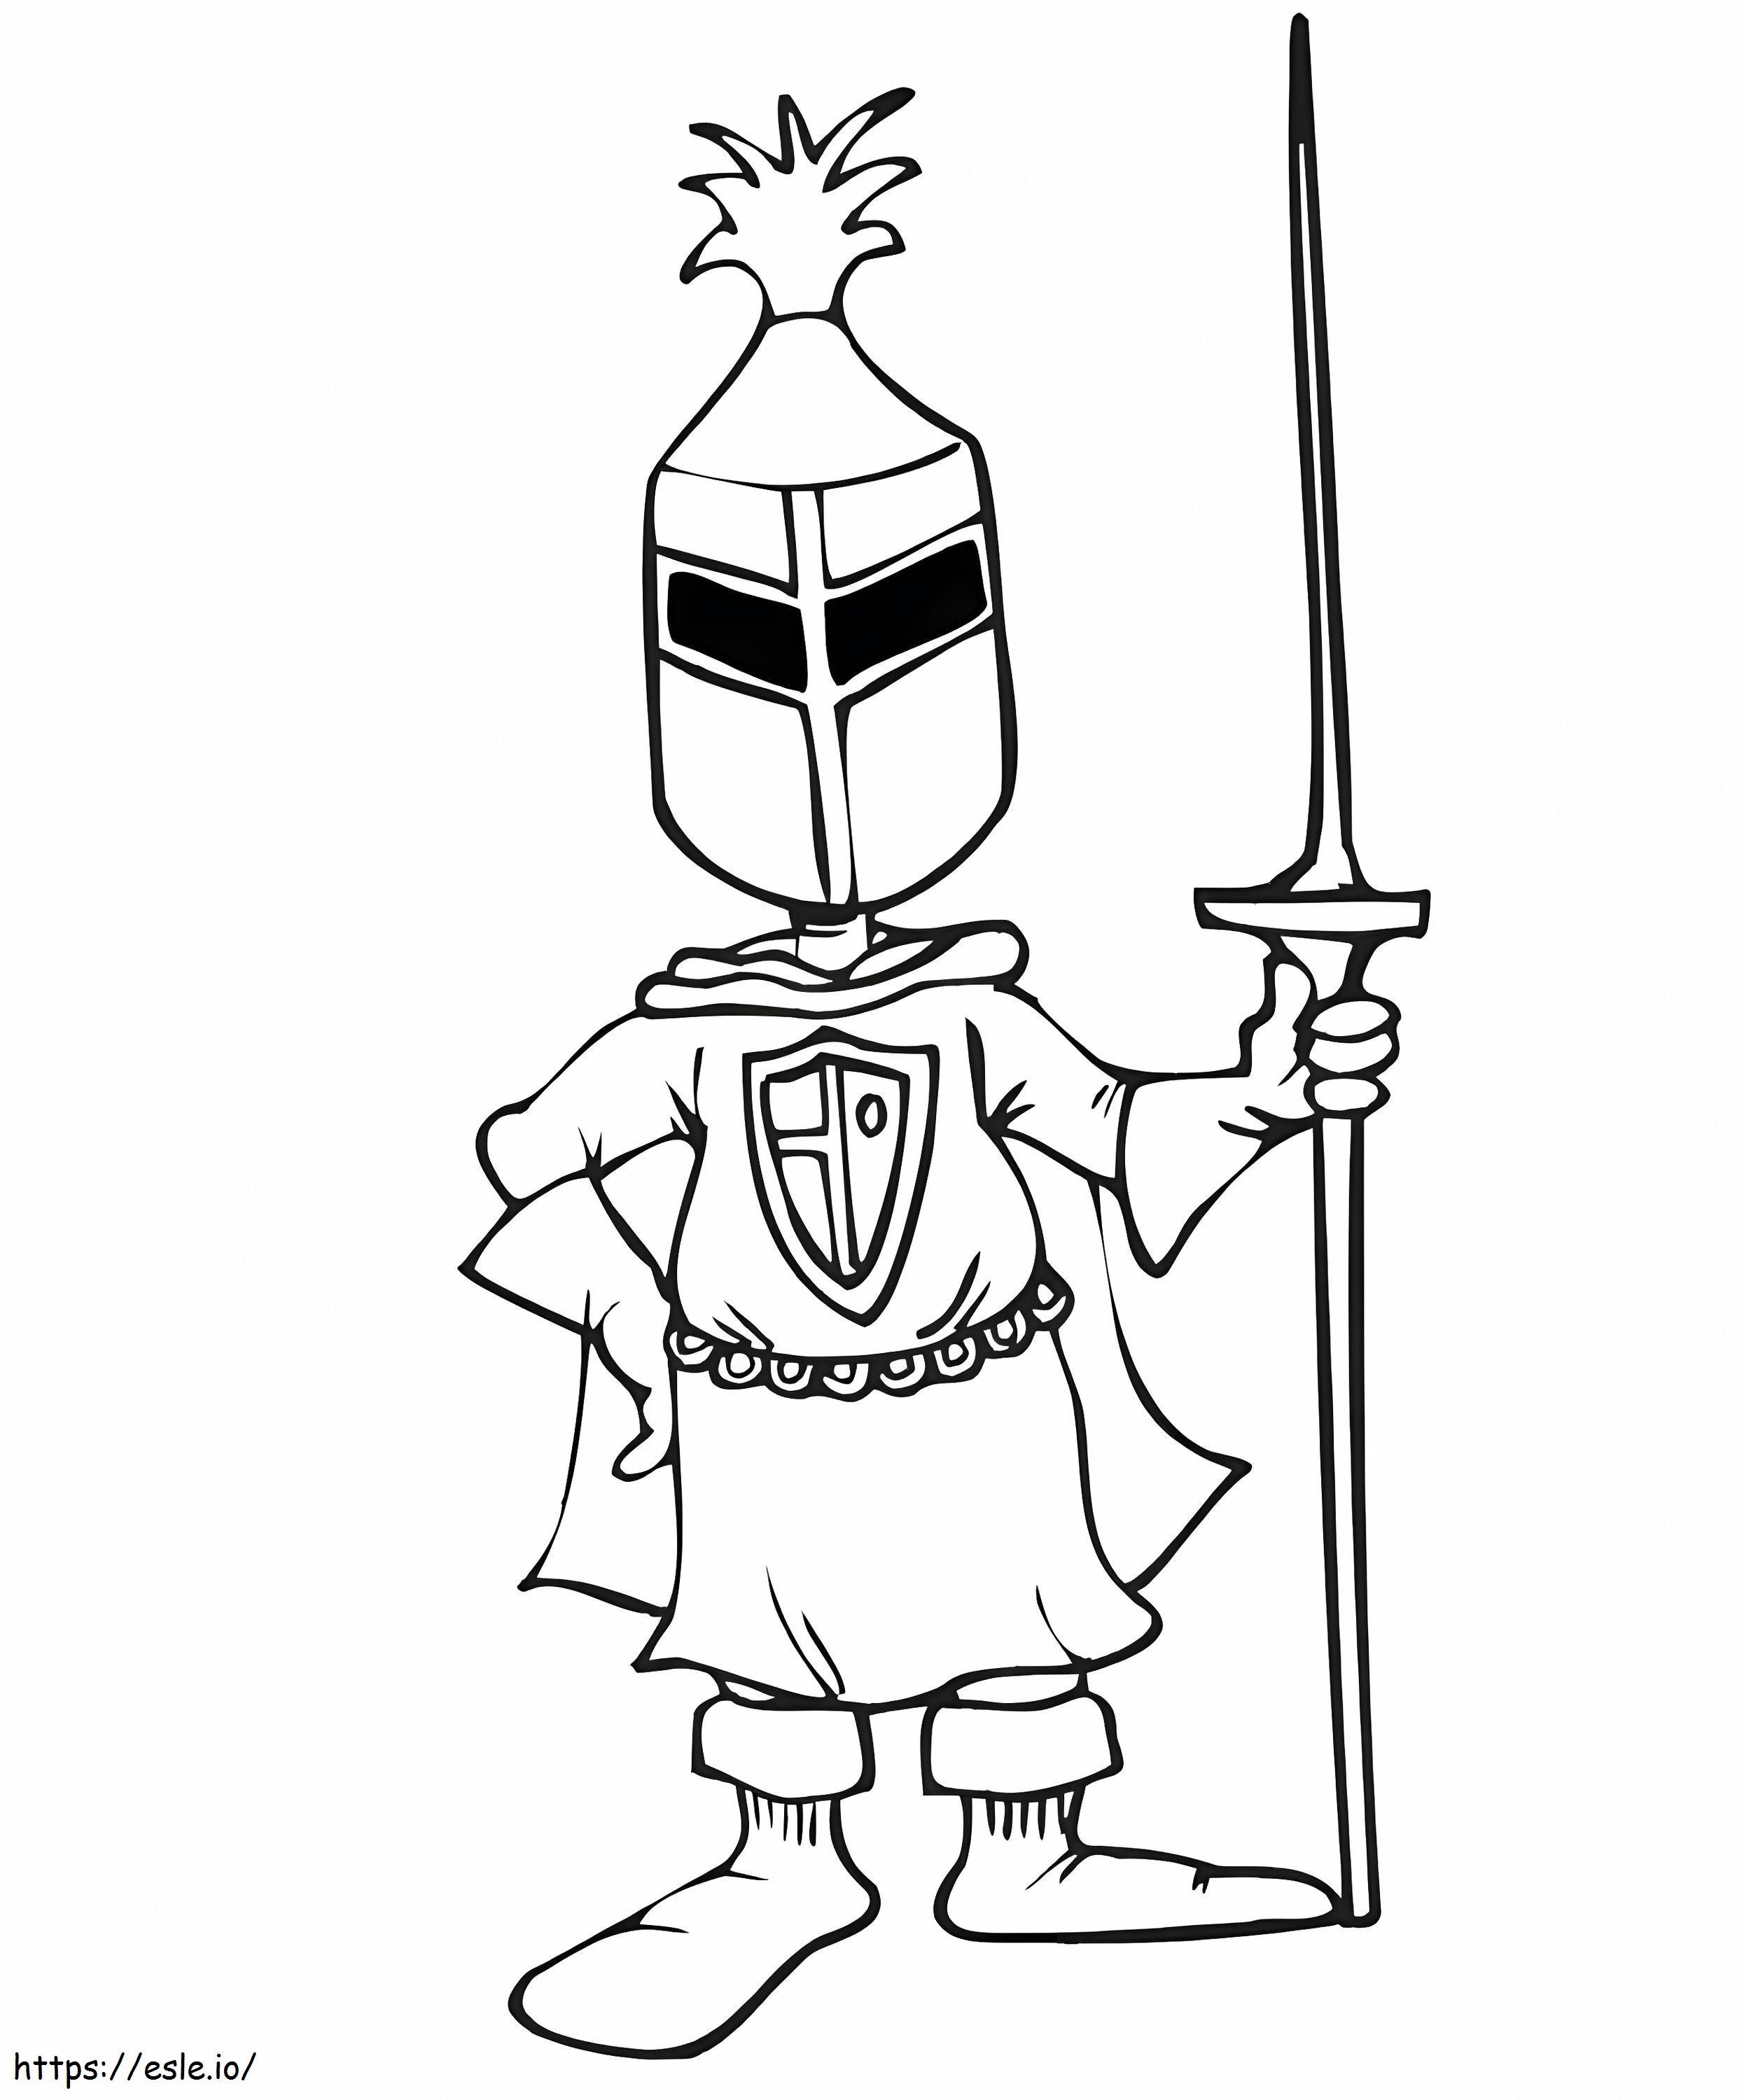 Secret Knight coloring page